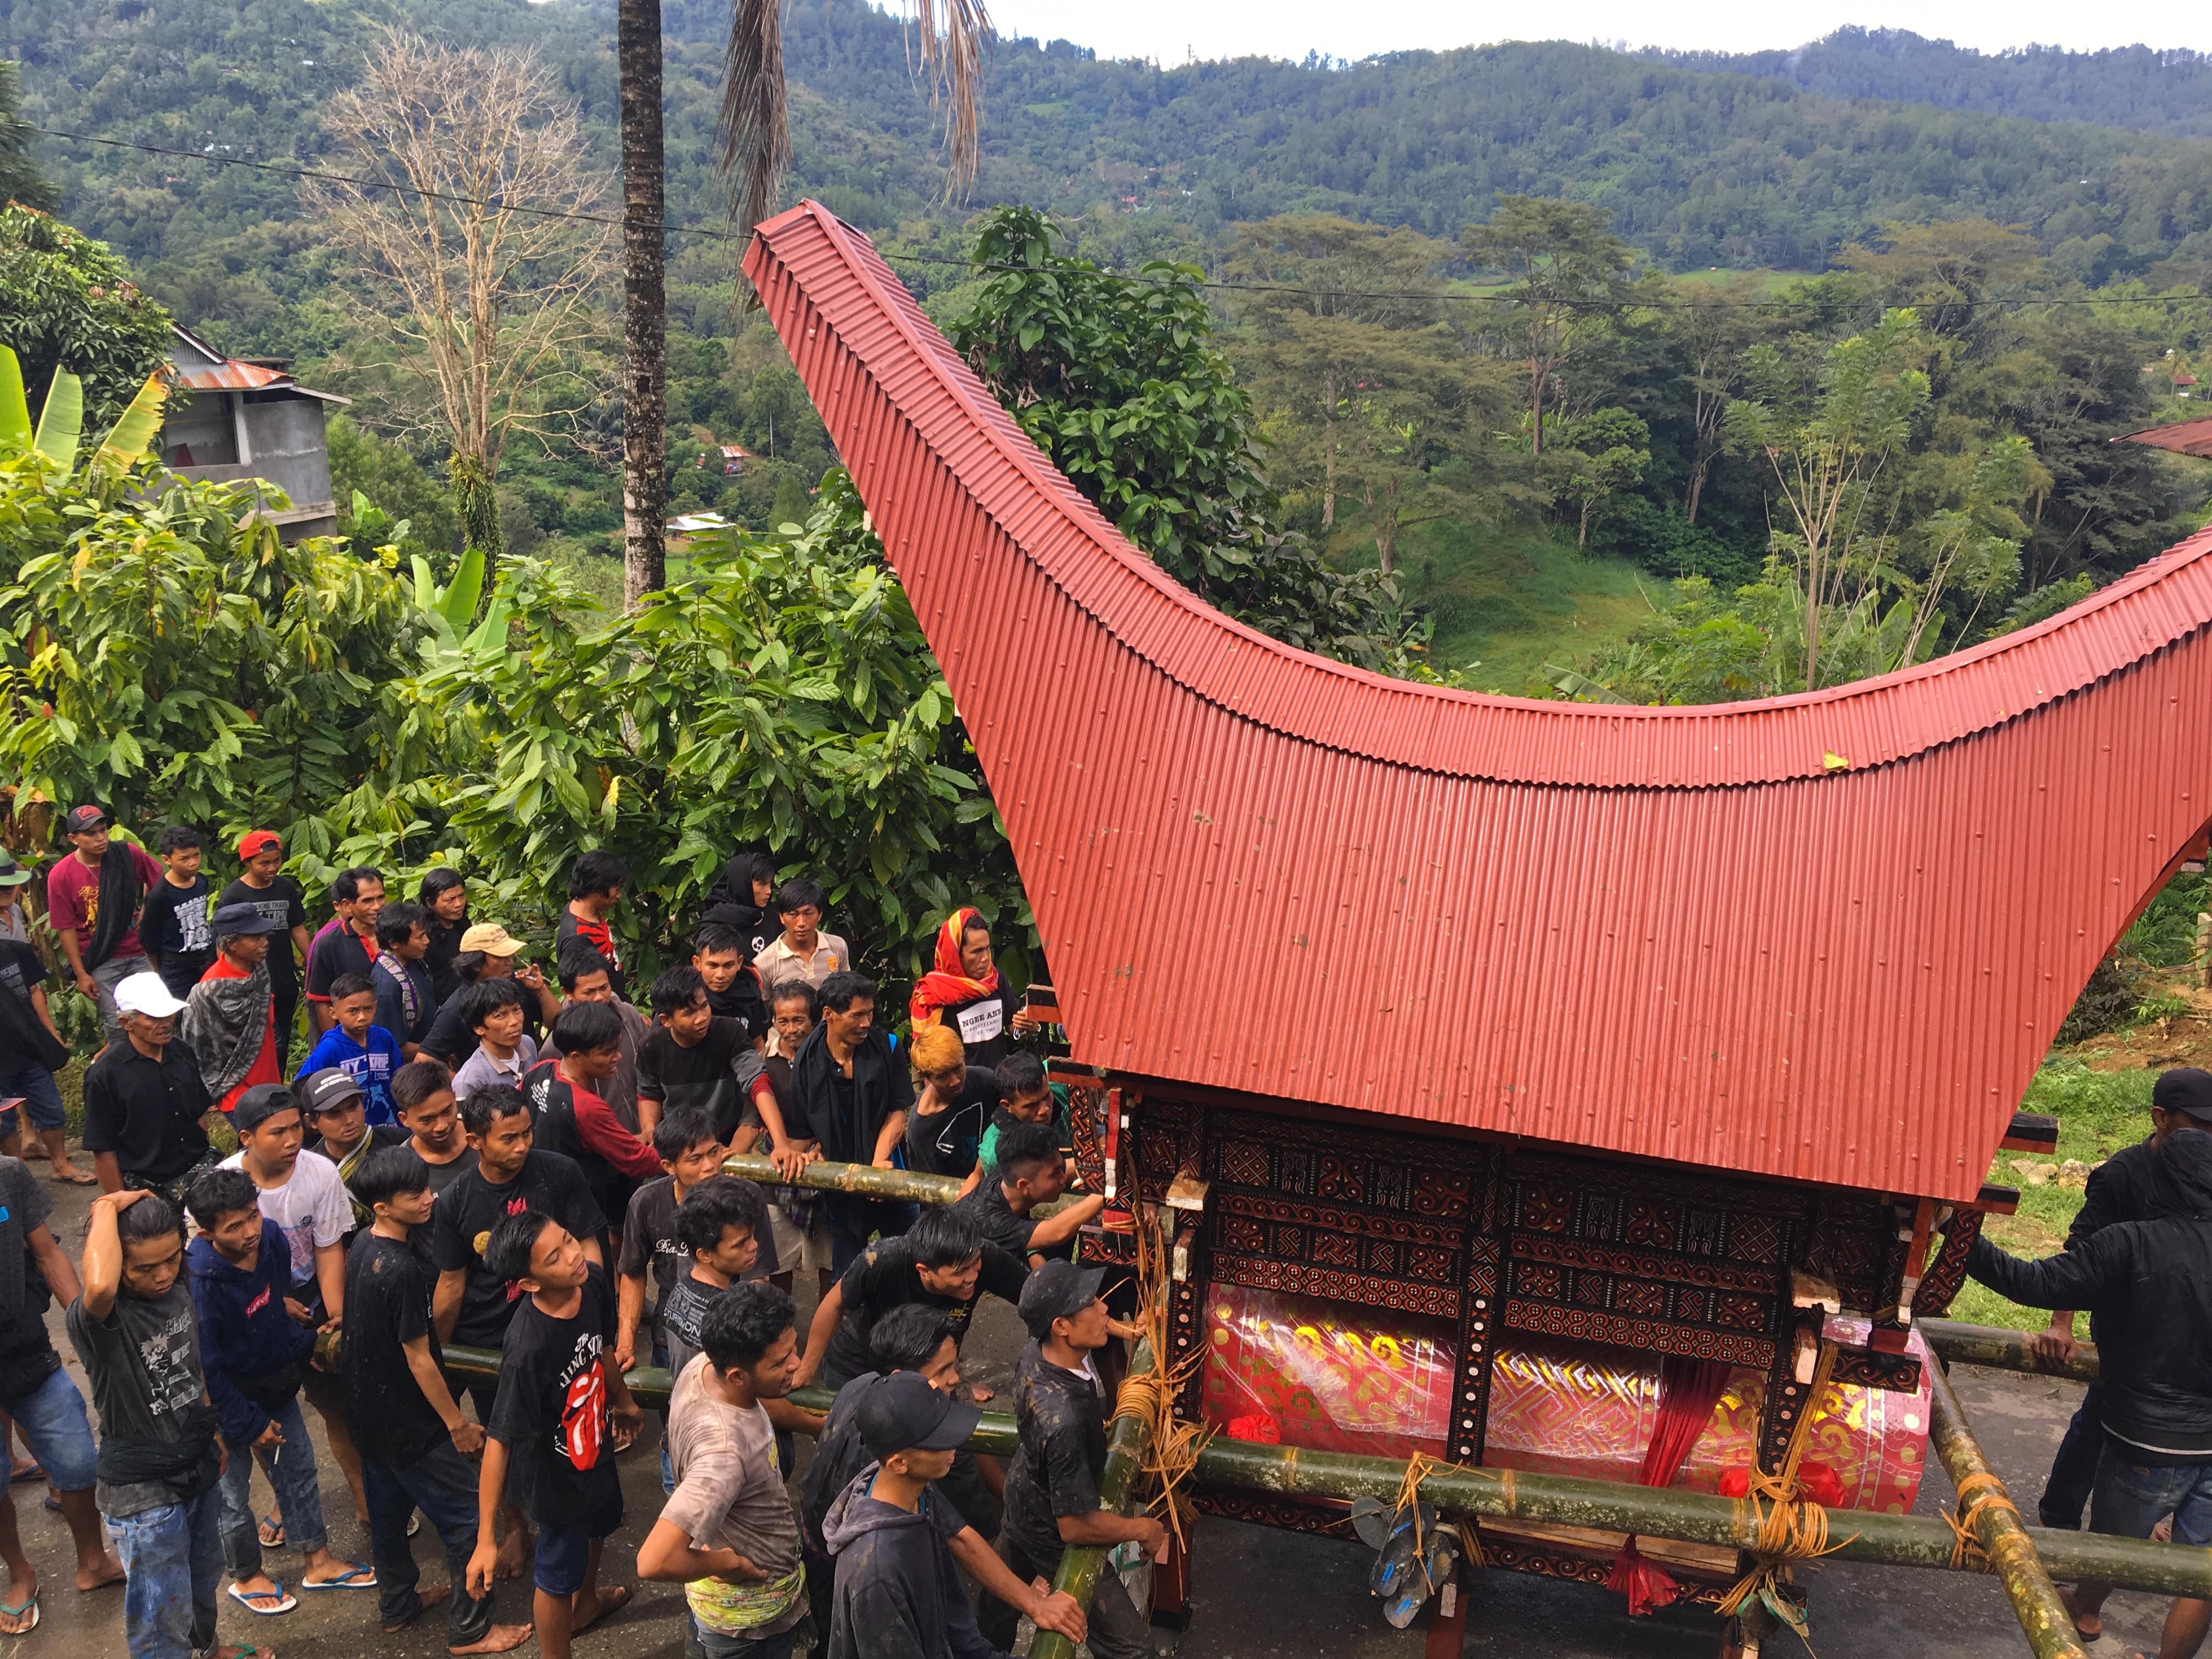 The start of a funeral procession in Tana Toraja, Sulawesi, Indonesia. The code of cultural beliefs of the Torajan people, Aluk (“The Way”), views funerary rites as the most important part of societal life, with the dead usually transported in a miniature version of the traditional tongkonan house.